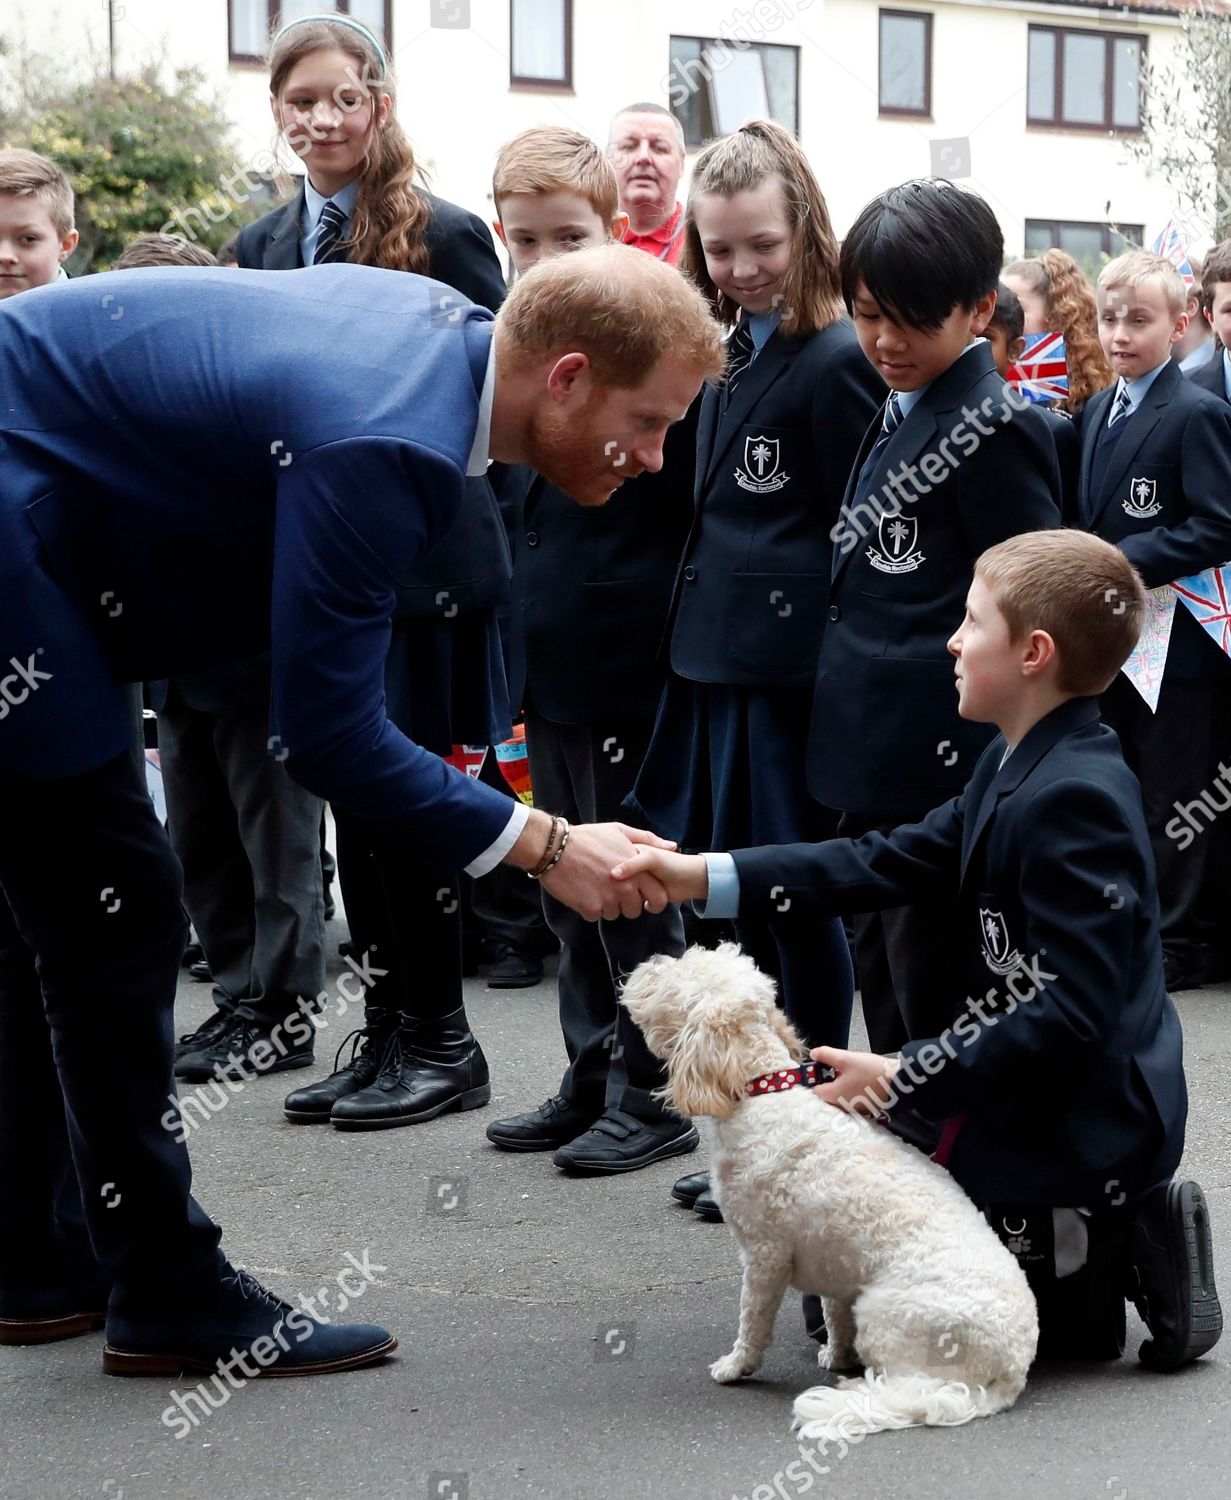 prince-harry-visits-st-vincents-catholic-primary-school-for-commonwealth-canopy-and-woodland-trust-tree-planting-ceremony-london-uk-shutterstock-editorial-10161063s.jpg